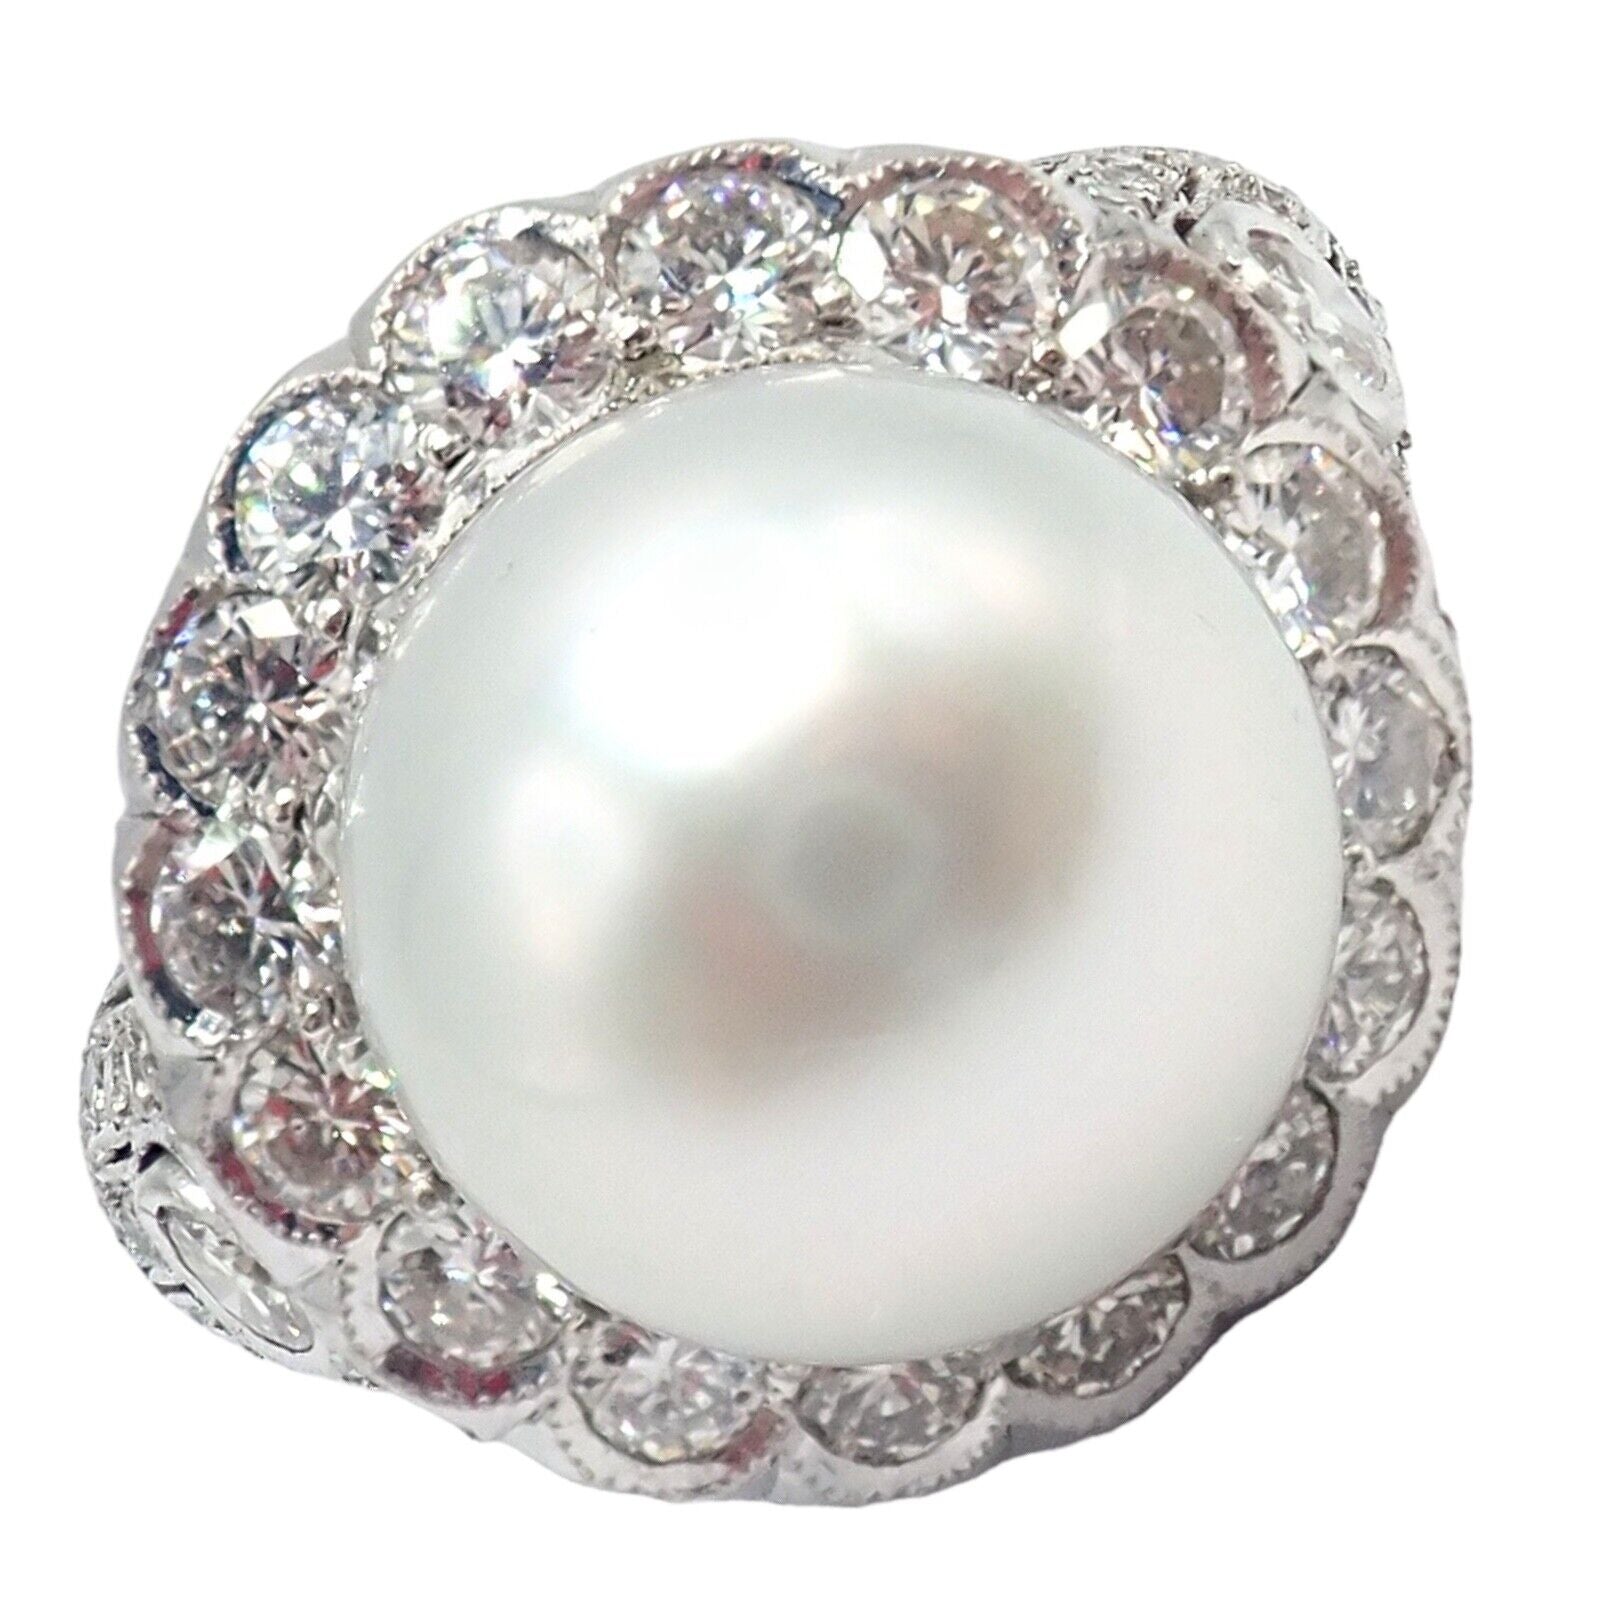 Estate Jewelry & Watches:Vintage & Antique Jewelry:Rings Vintage Estate 18k White Gold Diamond 12.5mm Pearl Cocktail Ring